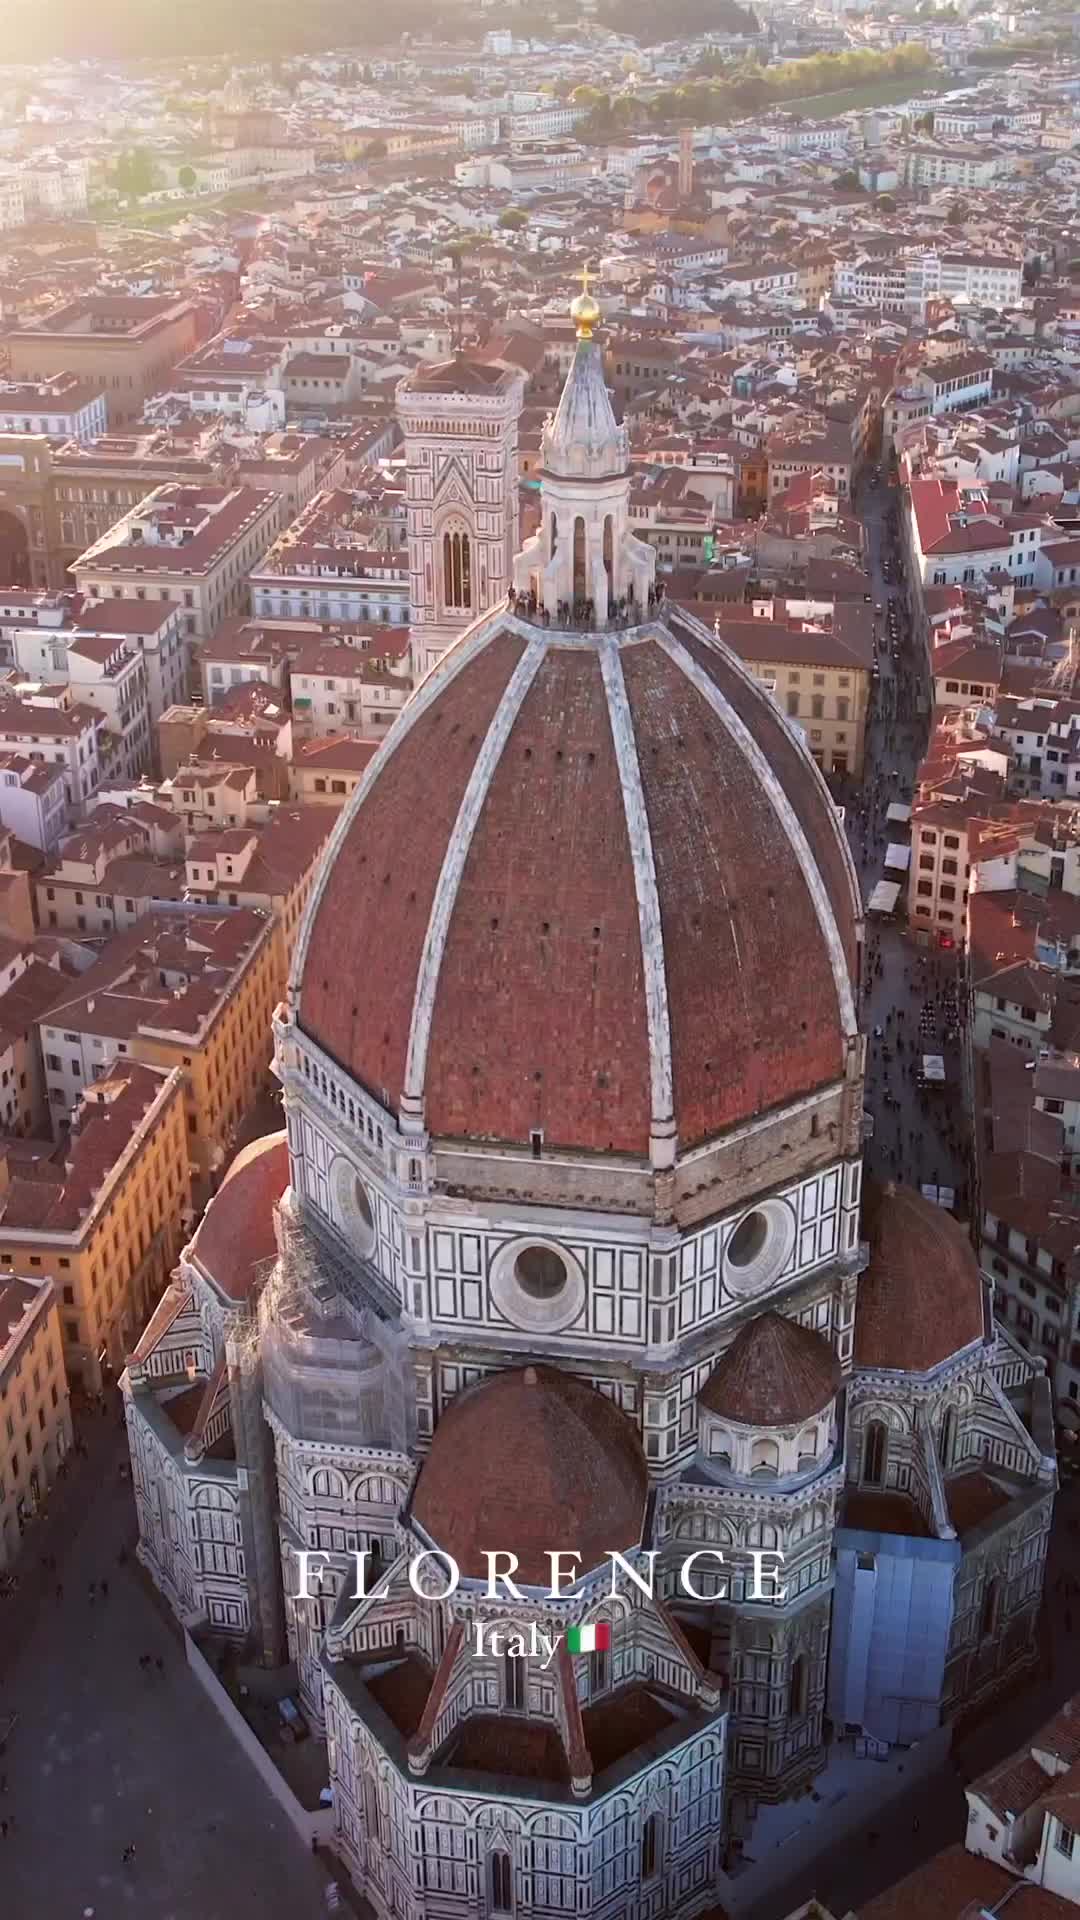 Discover the Magic of Florence, Italy 🇮🇹